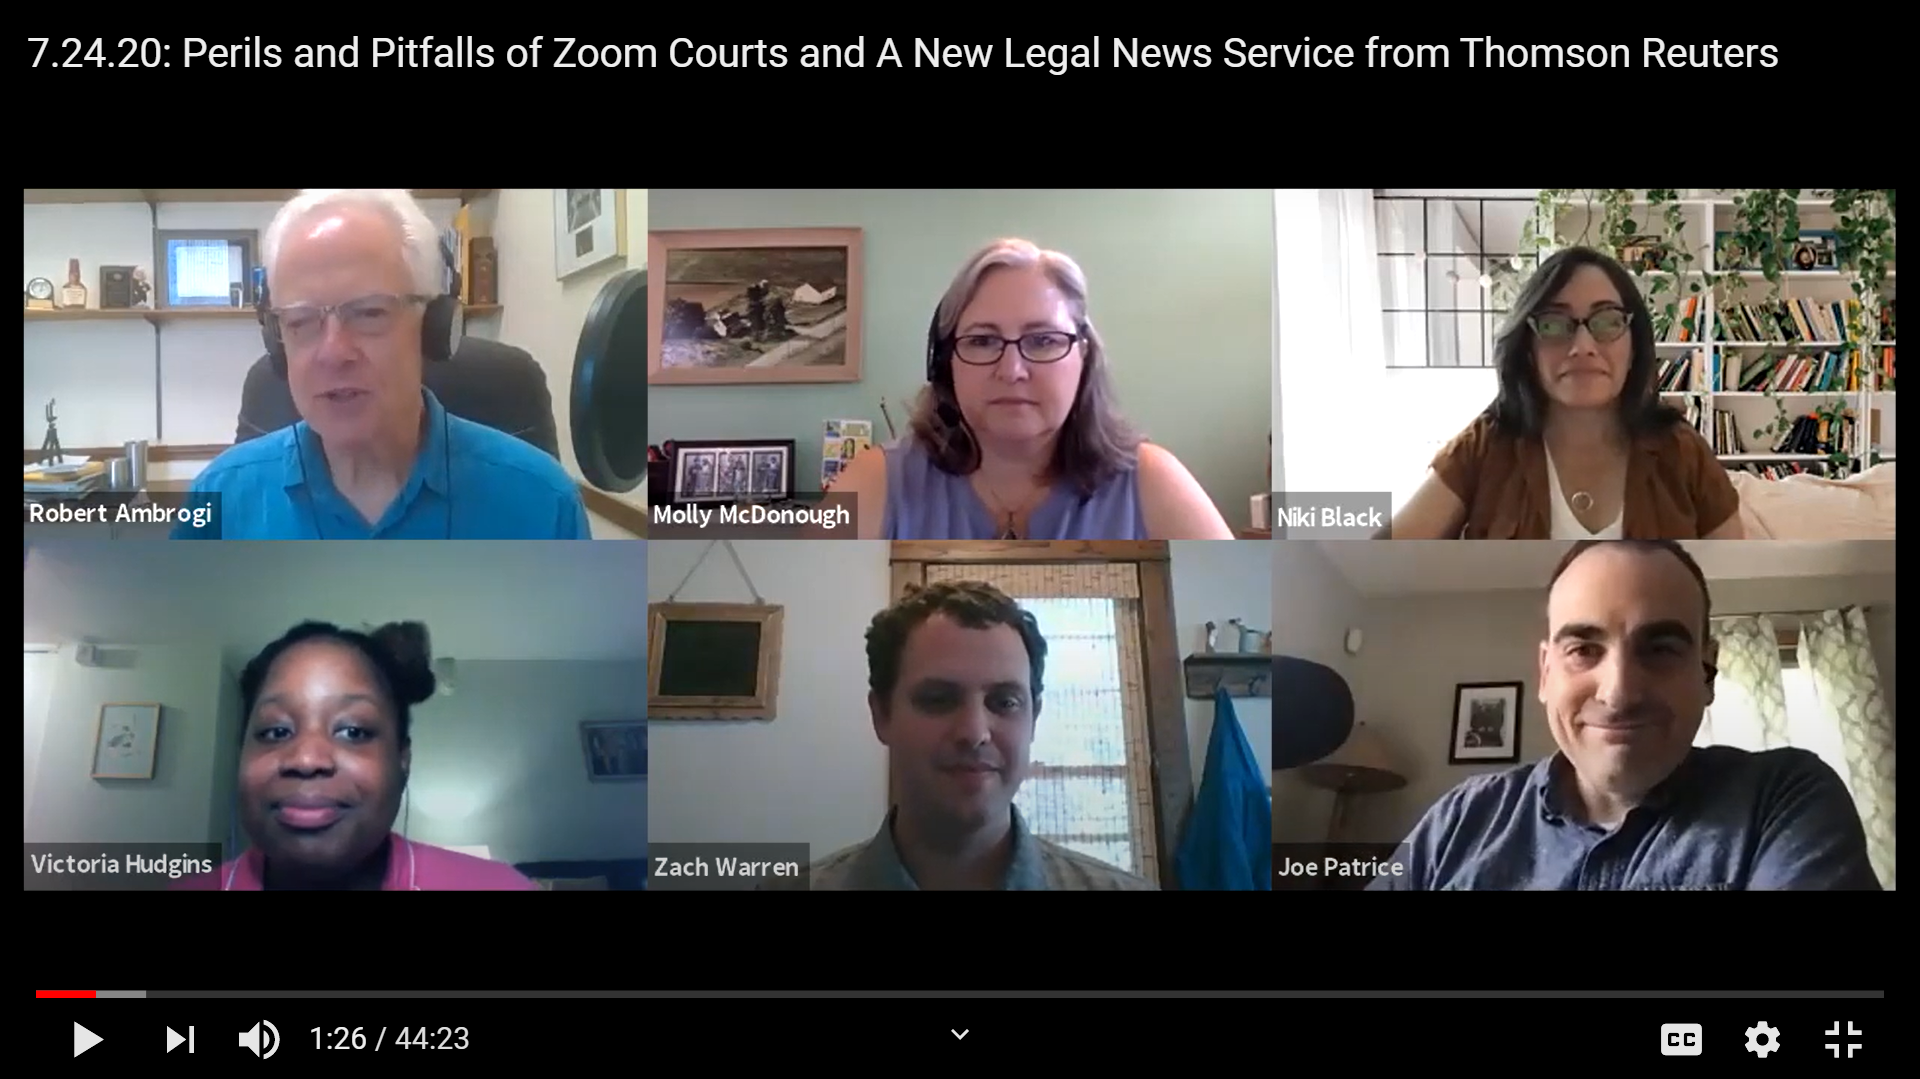 ICYMI: Legaltech Week Journalists&#8217; Roundtable for 7.24.20 &#8211; Pitfalls of Zoom Courts, New Legal News Service, and More